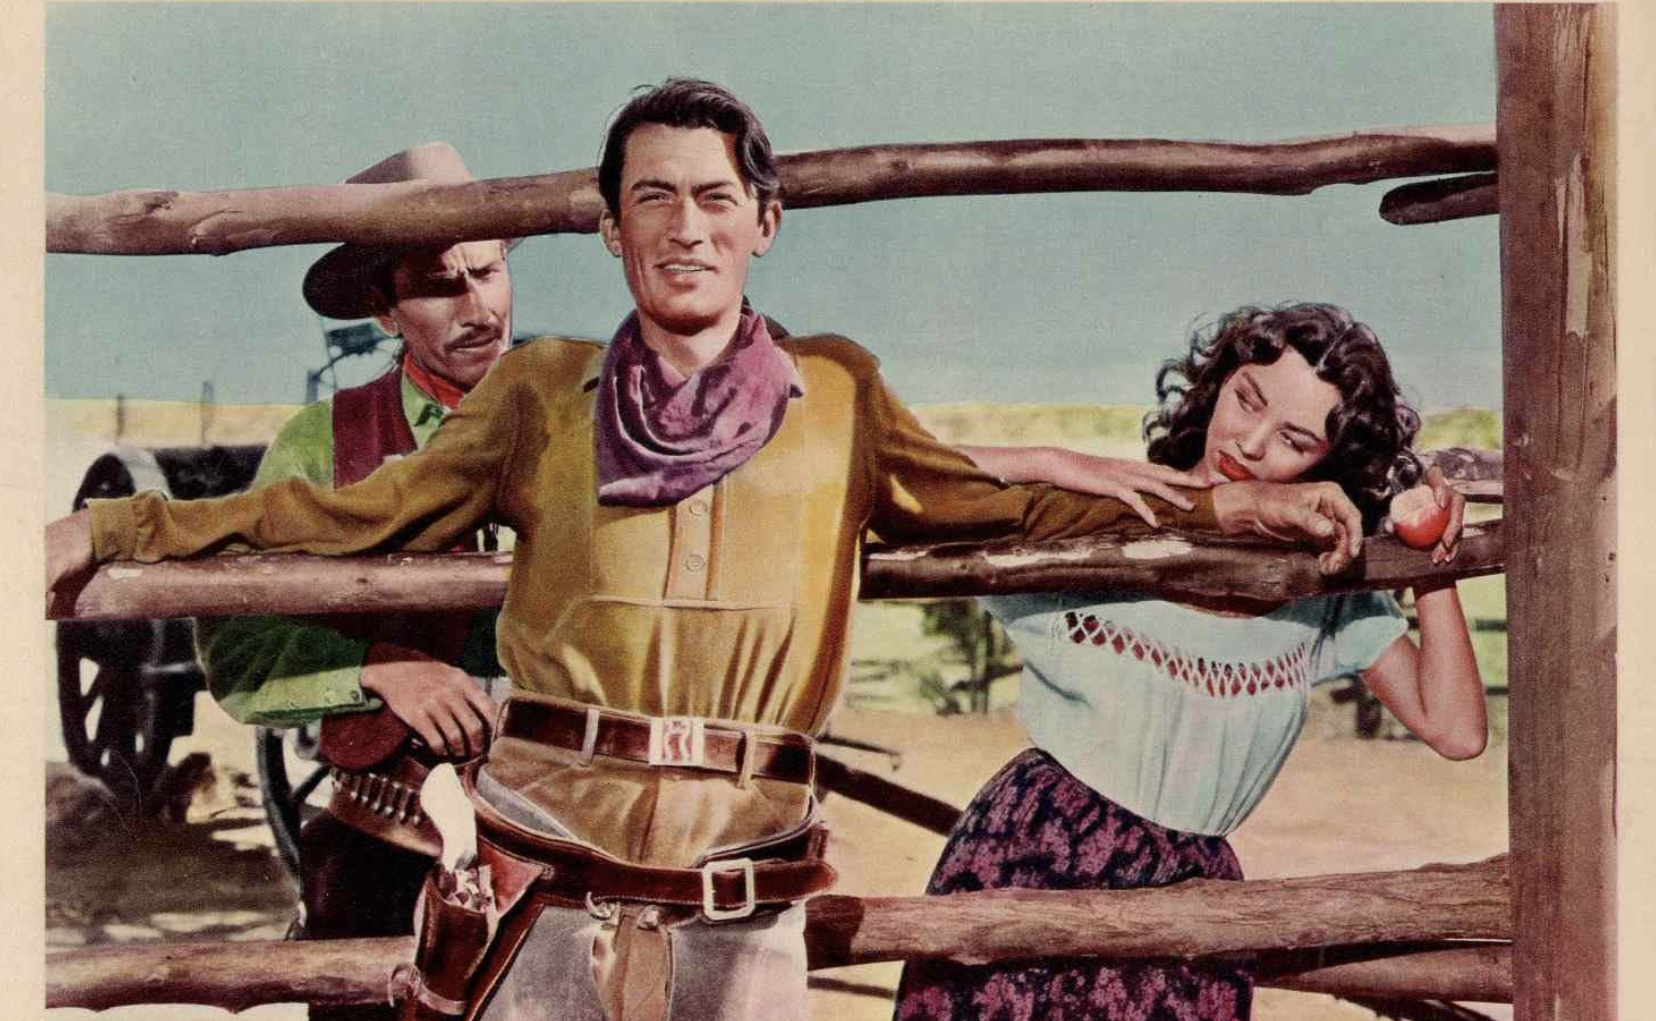 Gregory Peck as Lewton McCanles and Jennifer Jones as Pearl Chavez in Duel in the Sun (1946) (IMDb)